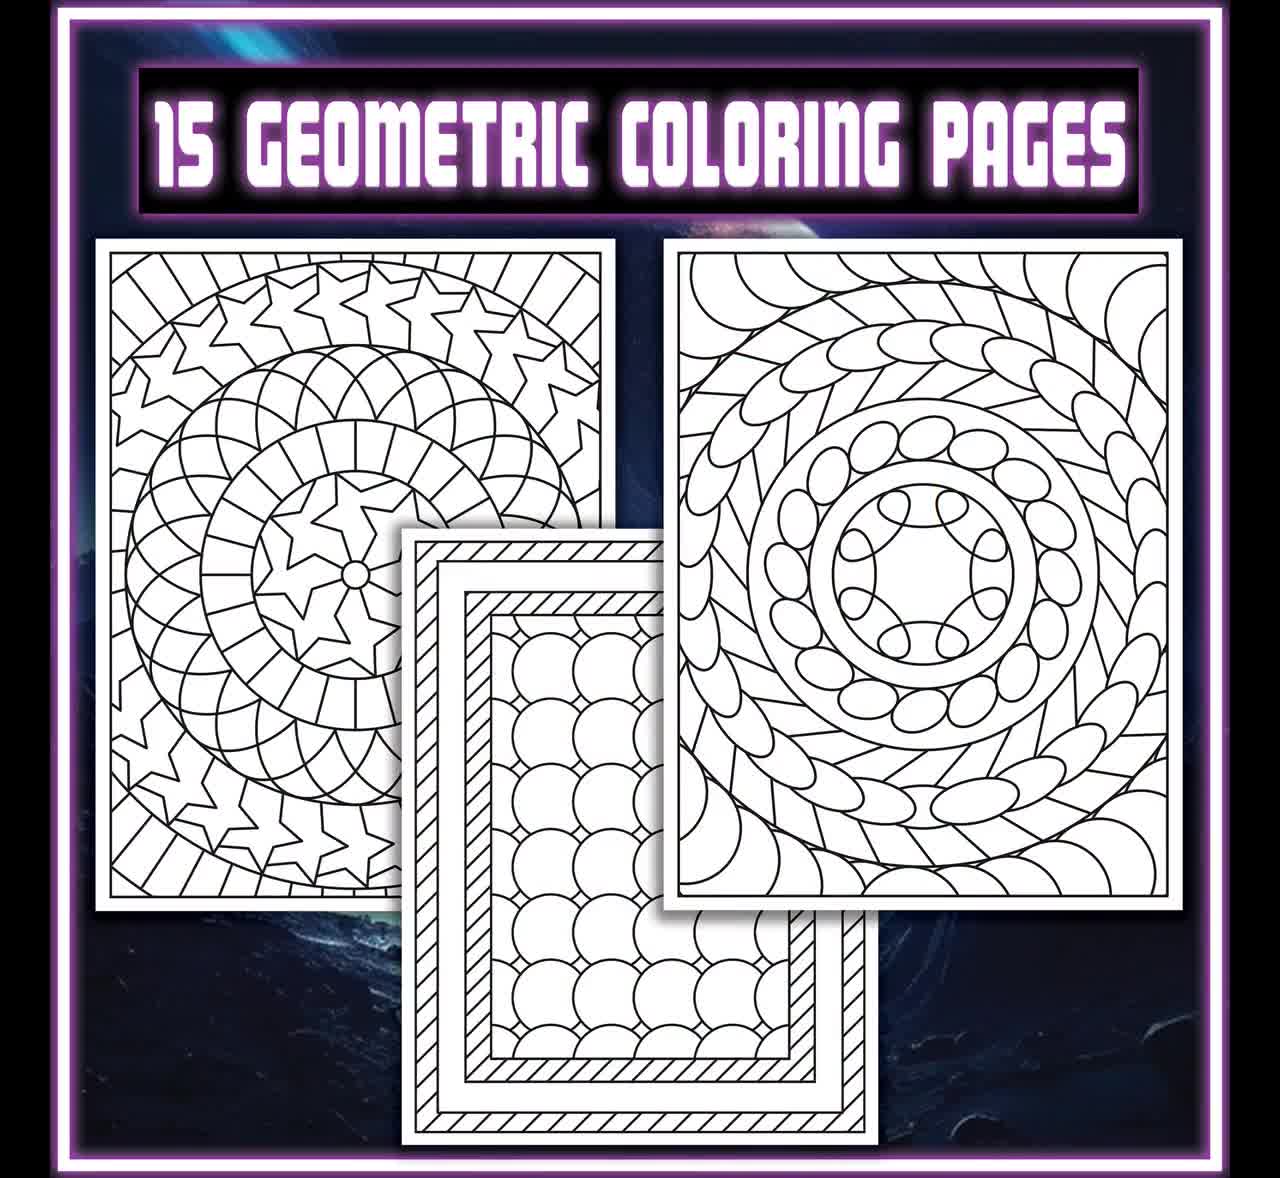 15 Abstract Pattern Coloring Pages, Geometric Shapes and 3D Patterns  Coloring Book for Adults, Abstract Pattern Sheets. Digital Download 